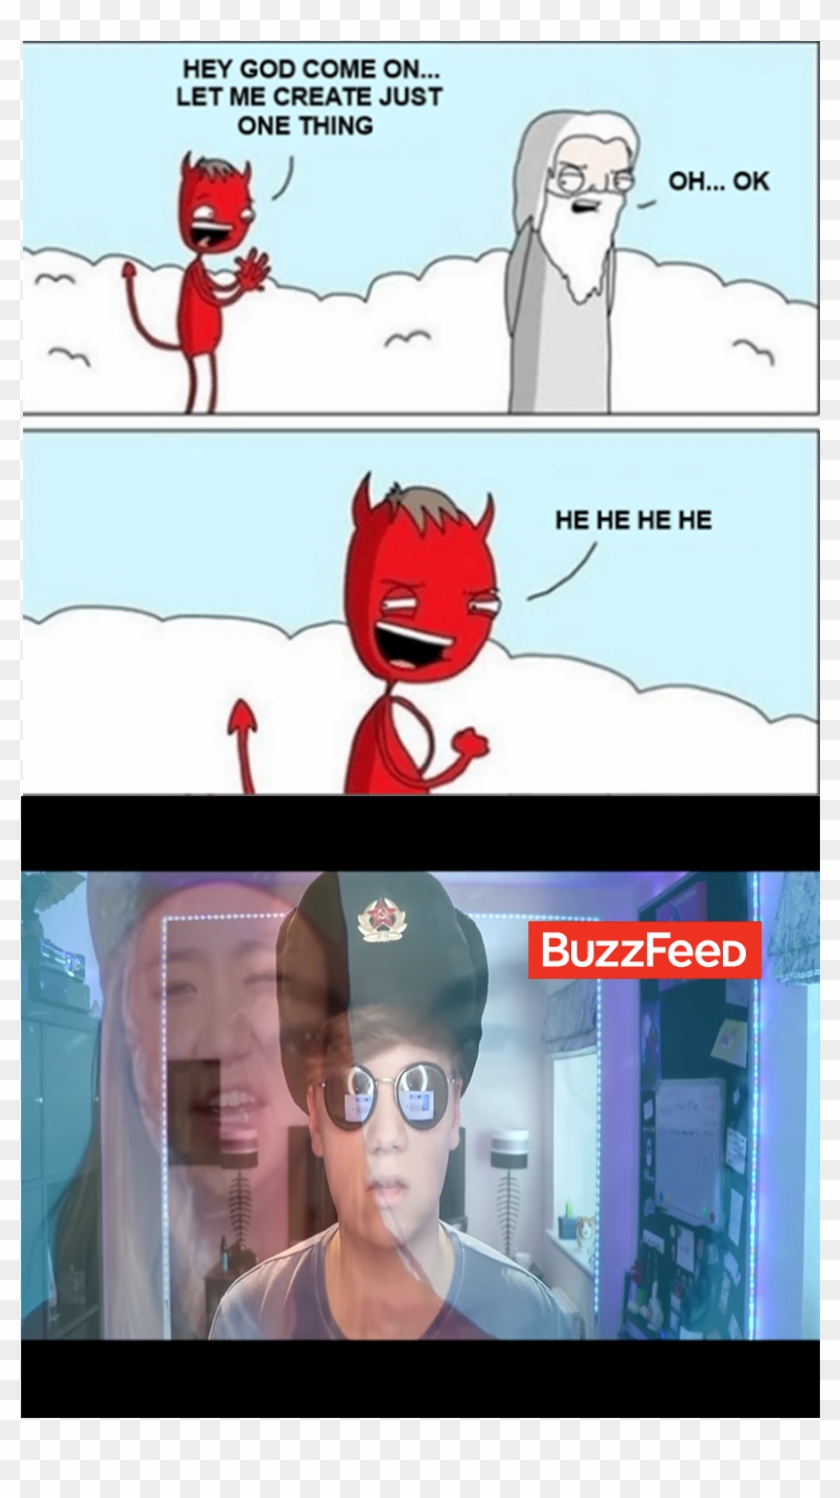 Buzzfeed Exposedfan - Let Me Create One Thing Meme Template Clipart